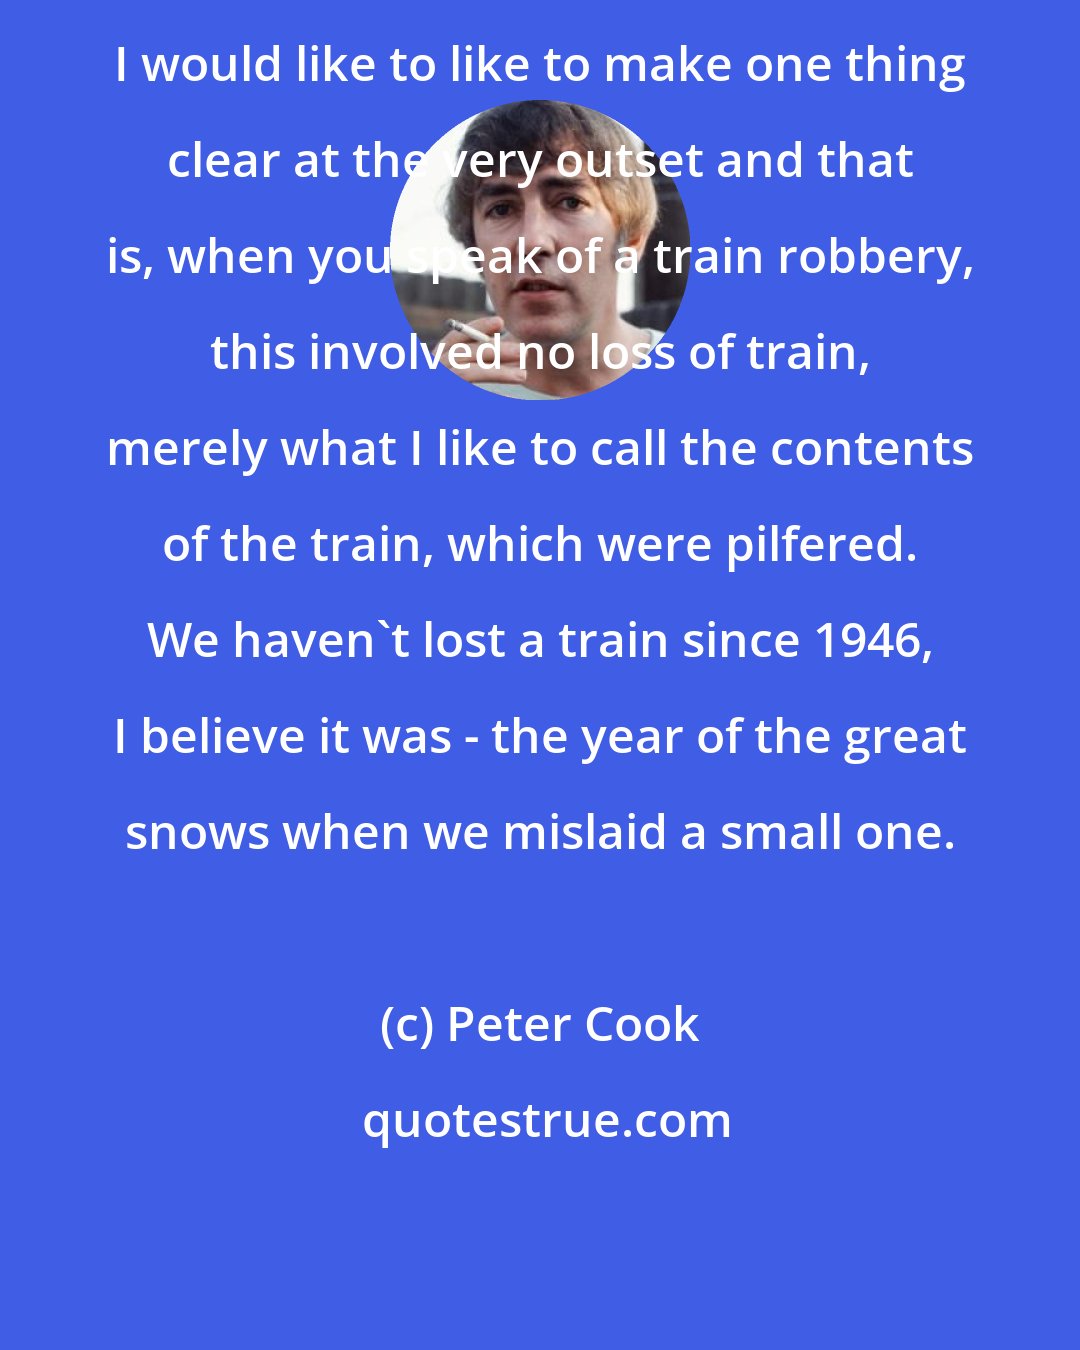 Peter Cook: I would like to like to make one thing clear at the very outset and that is, when you speak of a train robbery, this involved no loss of train, merely what I like to call the contents of the train, which were pilfered. We haven't lost a train since 1946, I believe it was - the year of the great snows when we mislaid a small one.